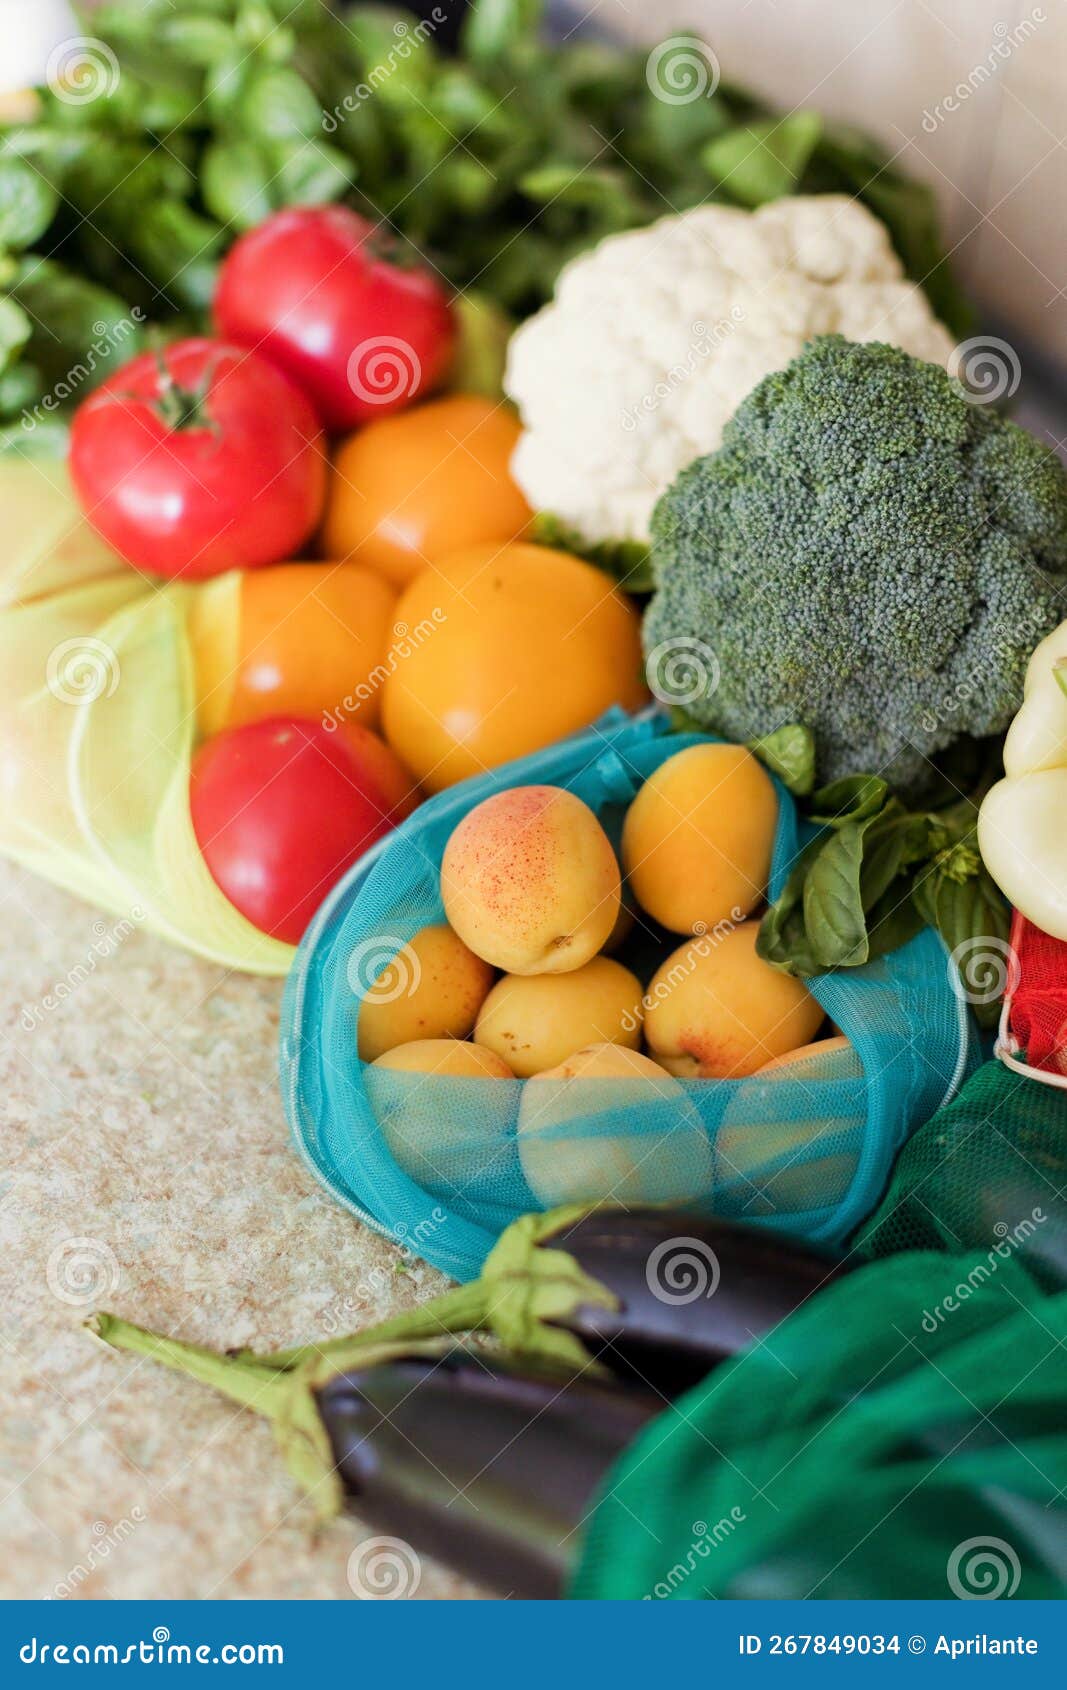 various vegetables in textile eco bags